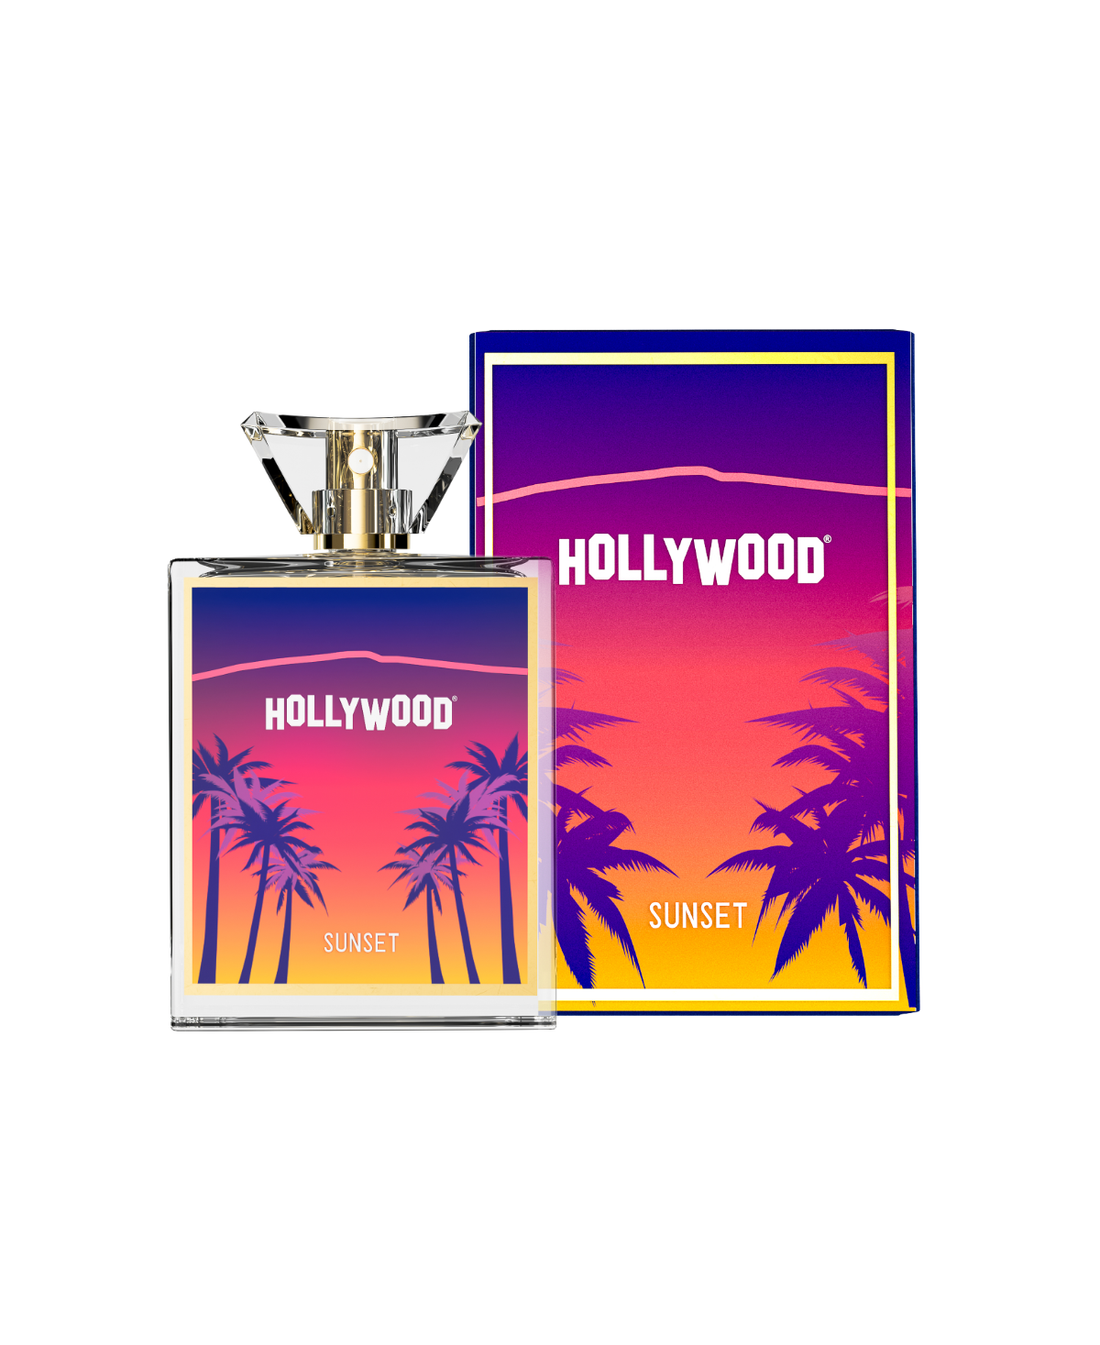 Hollywood Sunset - A fragrance by Vince Spinnato